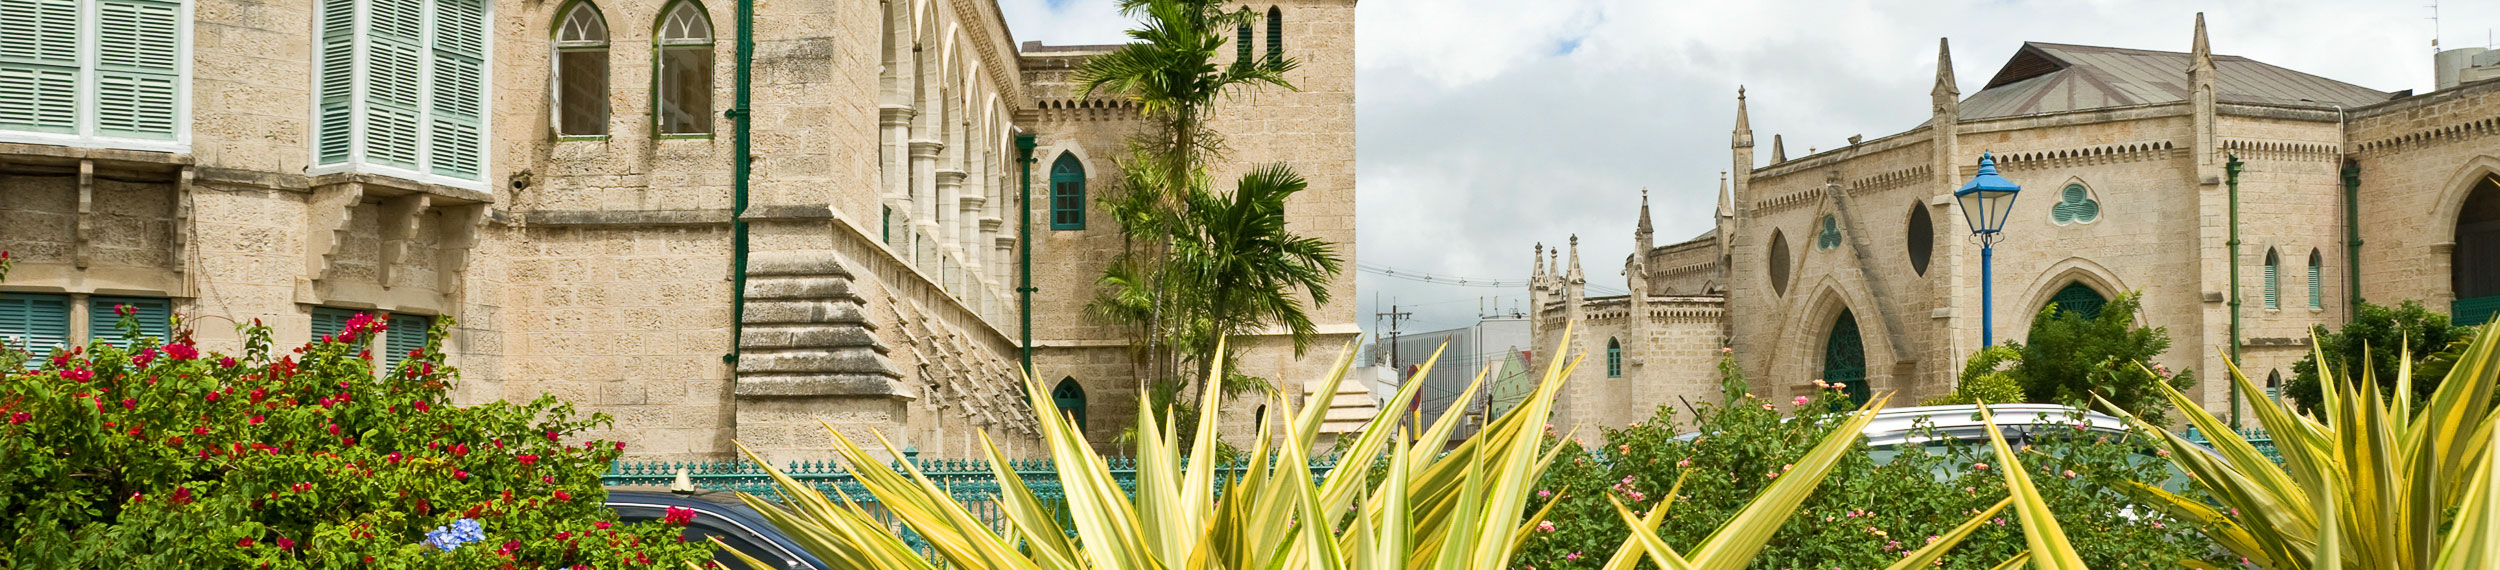 View of the Parliament Buildings in Bridgetown, Barbados. 